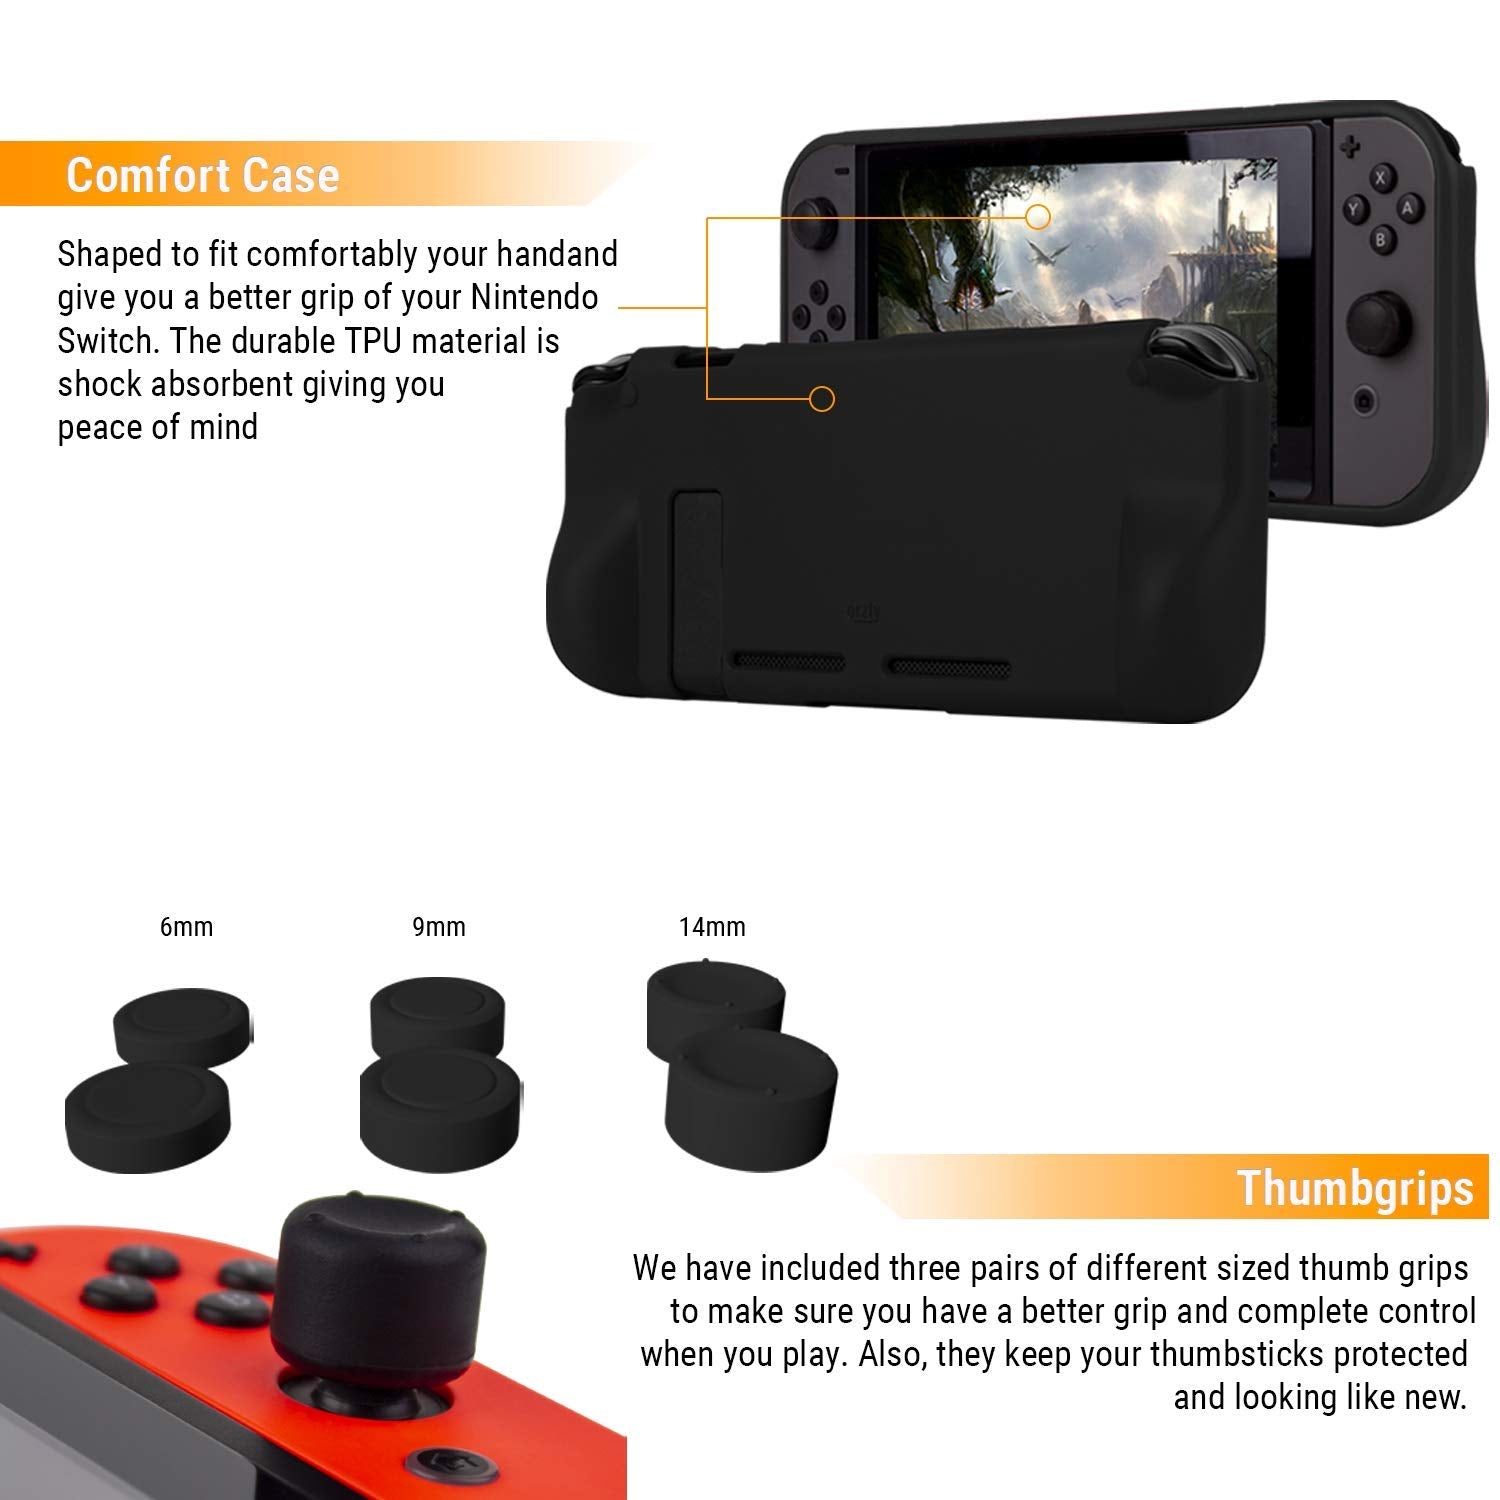 Orzly Accessory Bundle Kit designed for Nintendo Switch Accessories Geeks and OLED console users Case and Screen Protector, Joycon Grips and Wheels for enhanced games play and more - Jet black